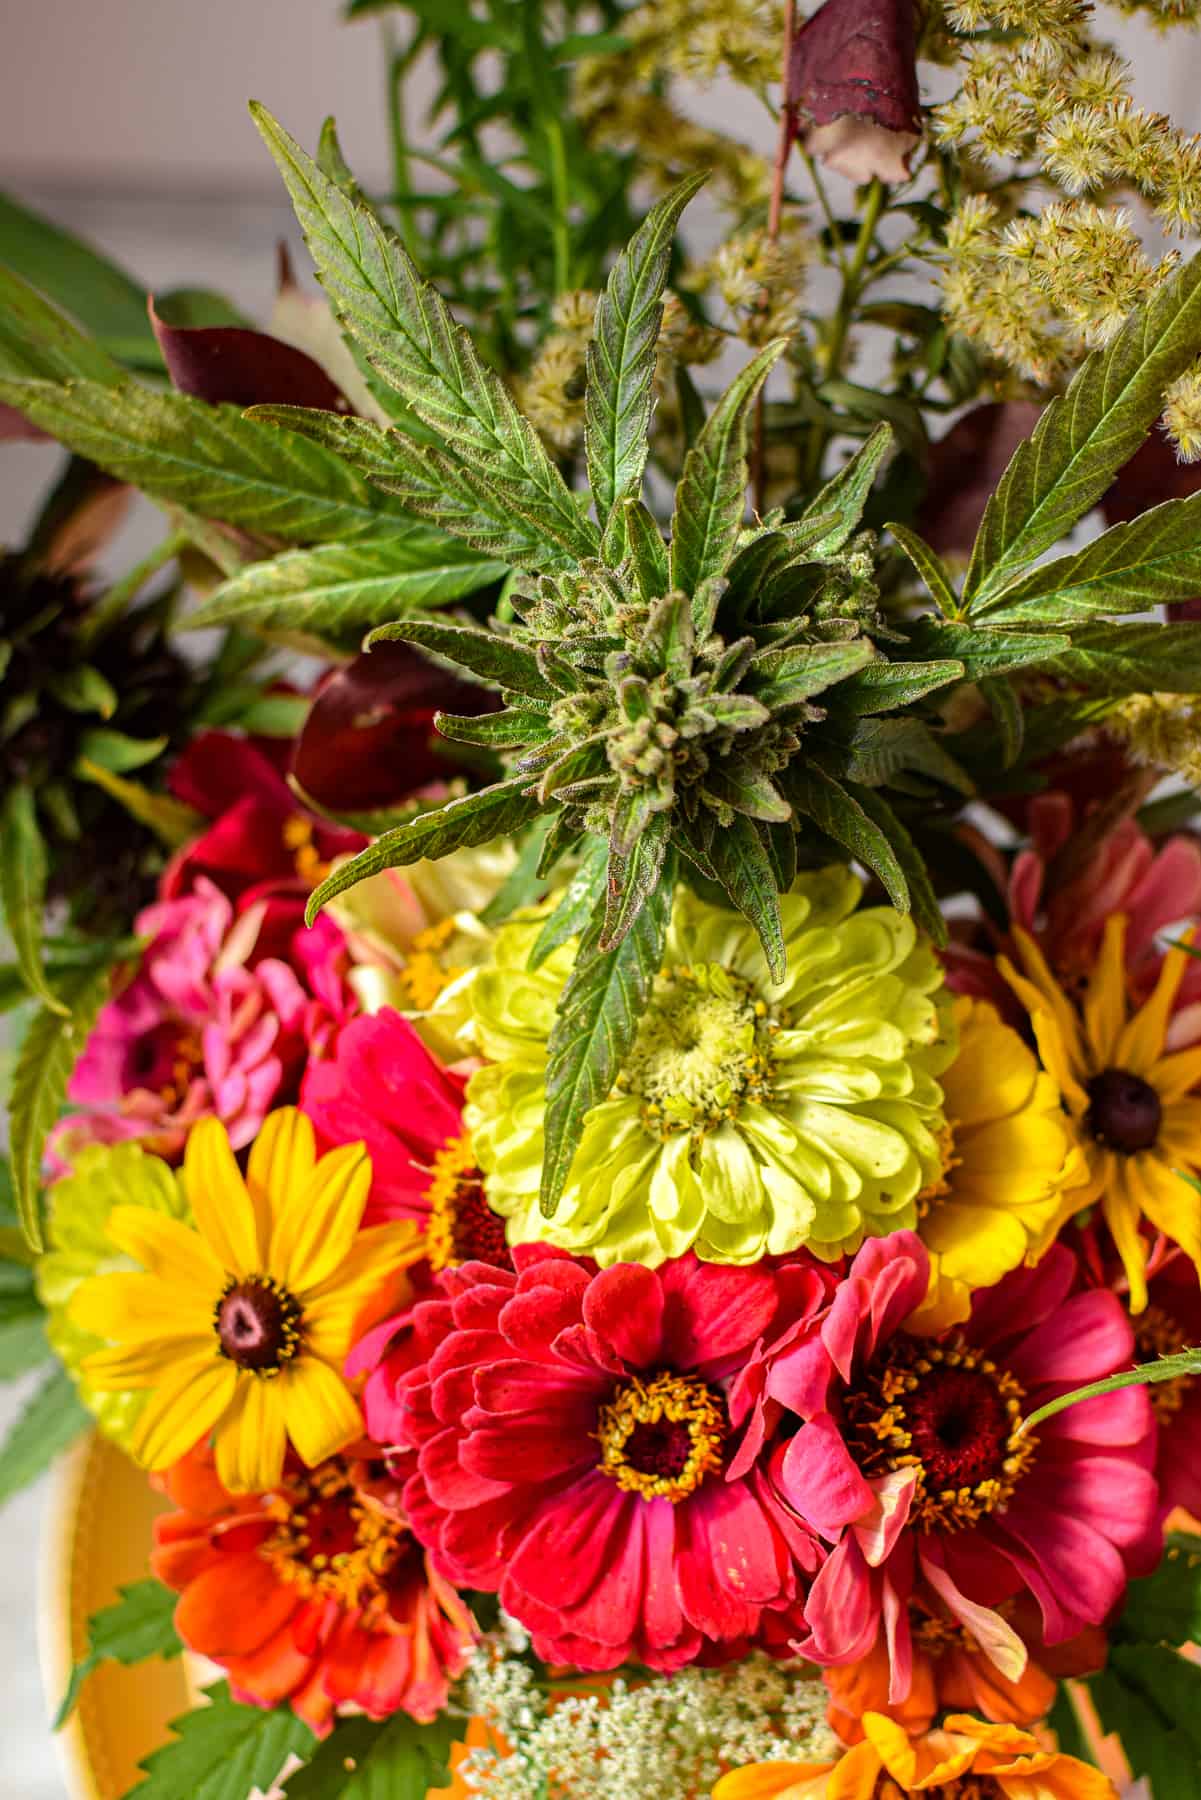 A bouquet of flowers including zinnias and cannabis flowers